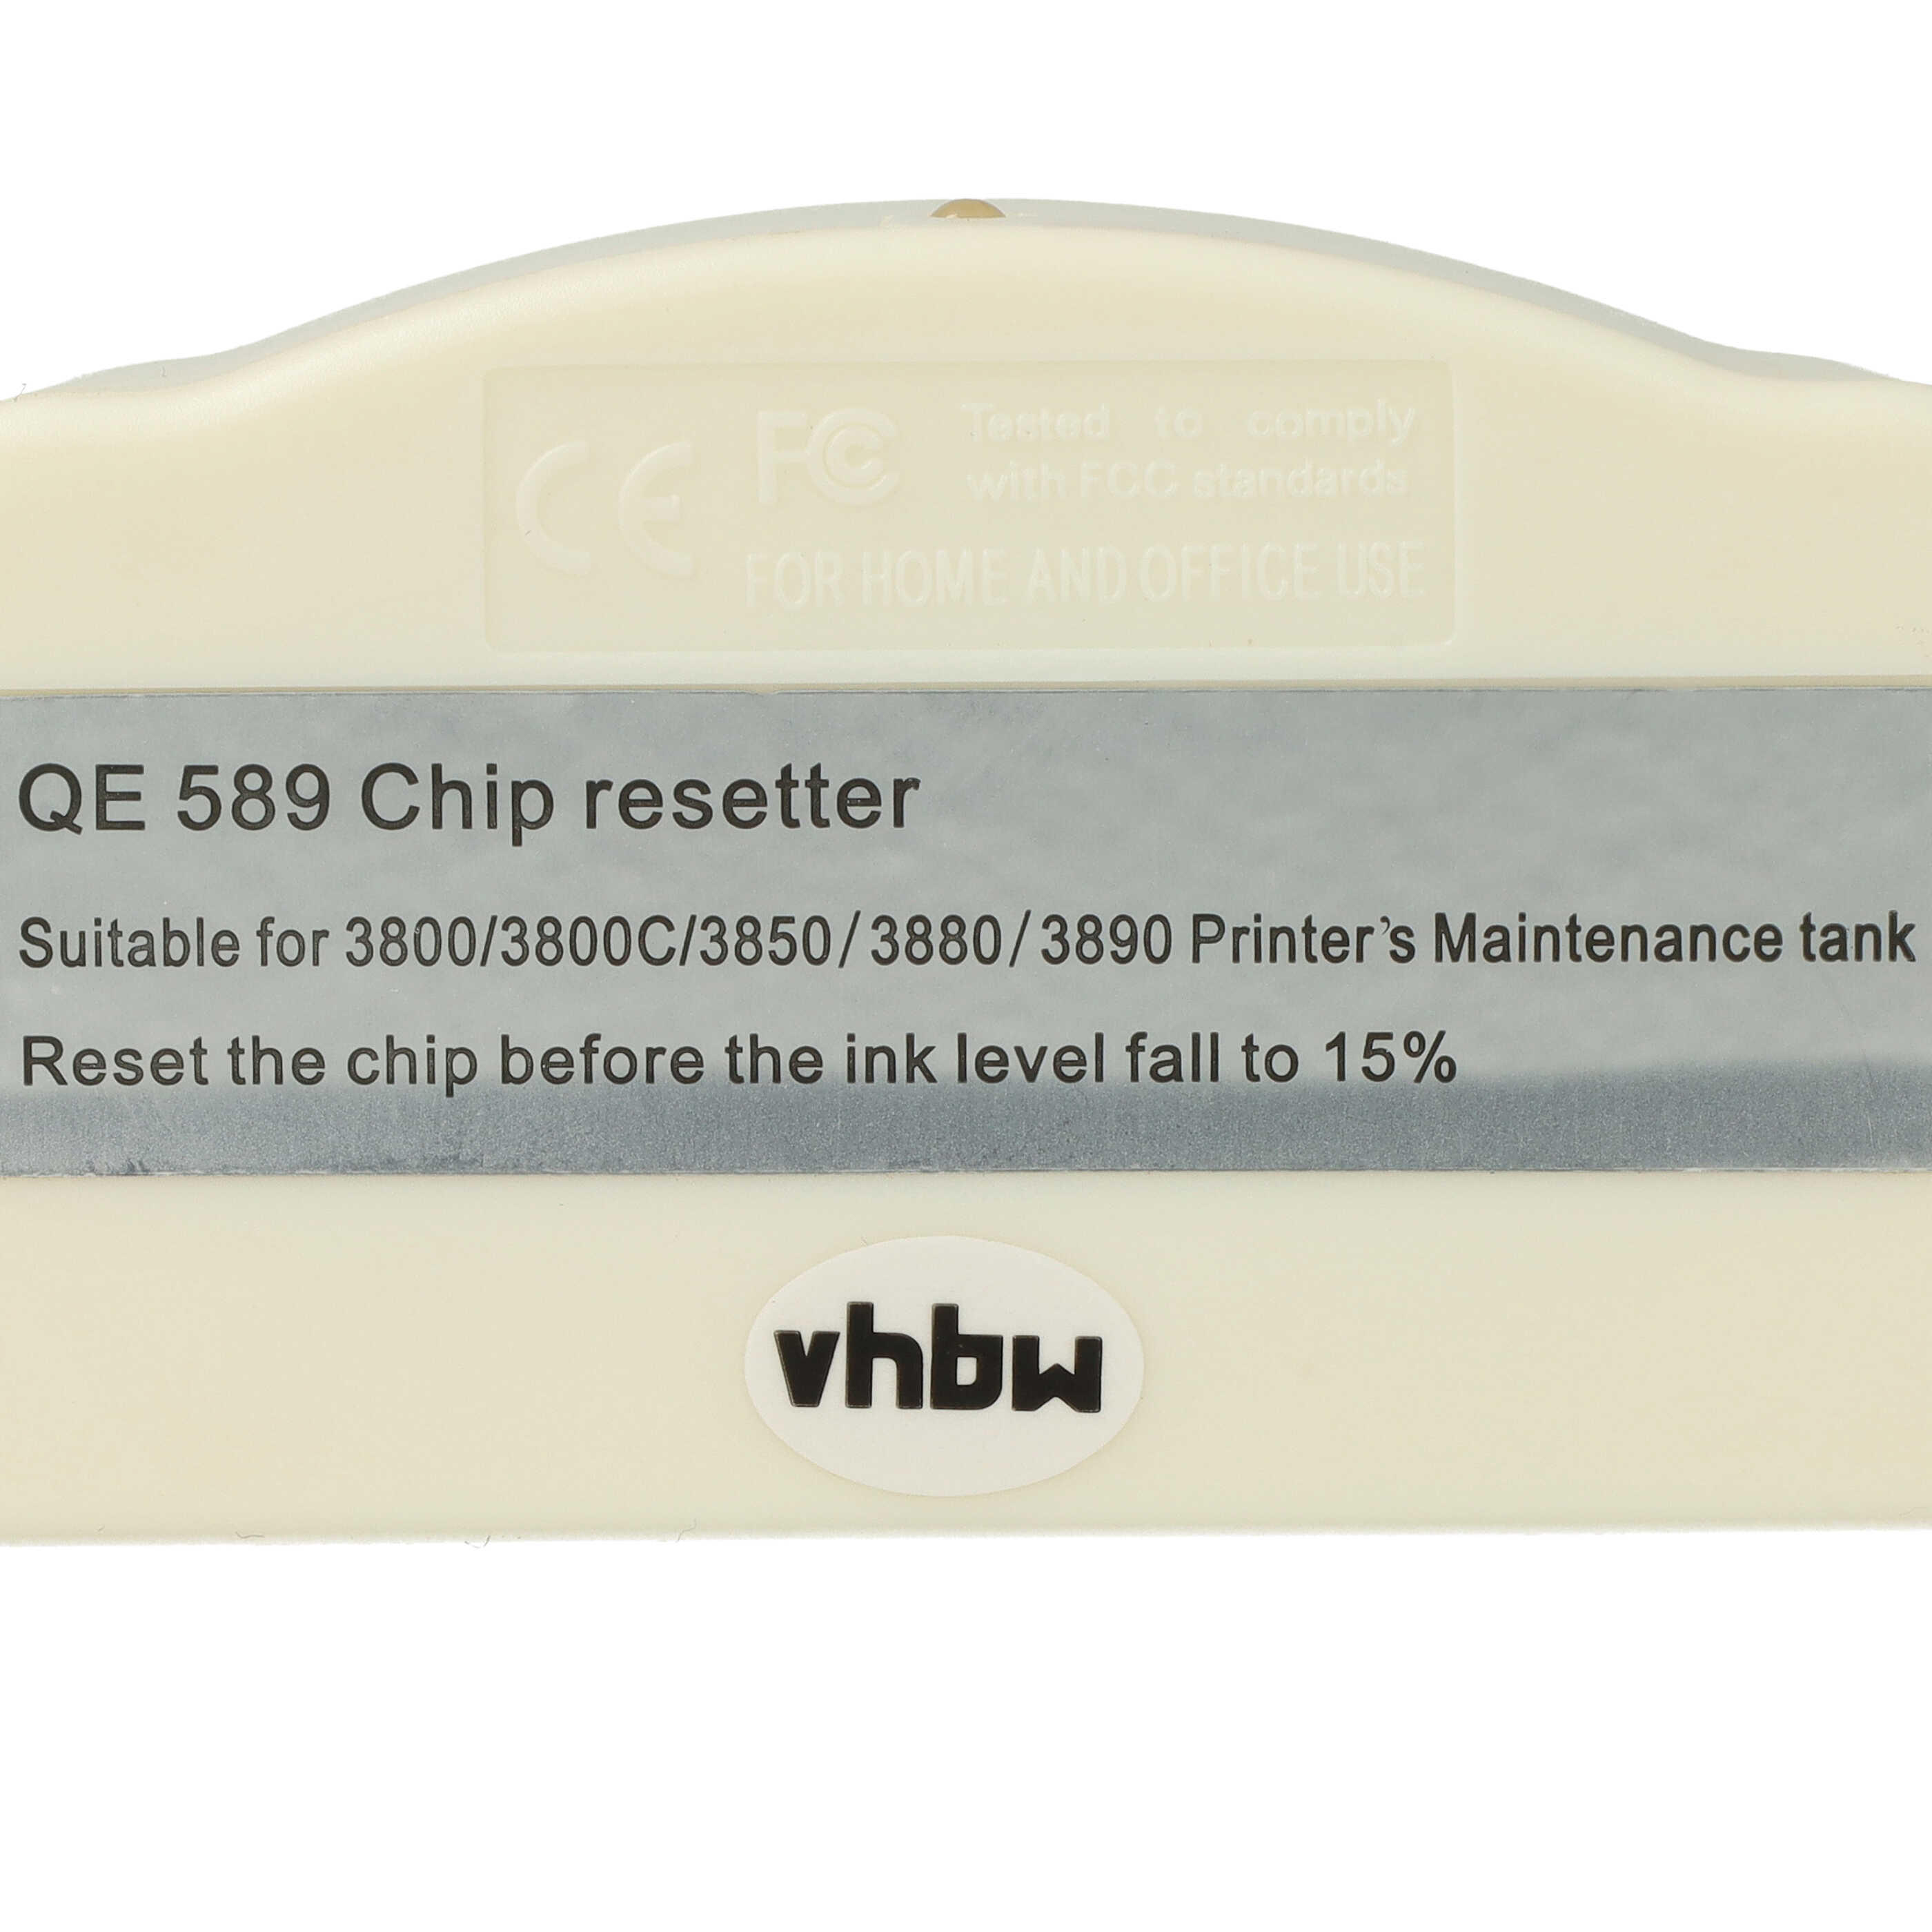 Chip Resetter replaces Epson T580100, T580400, T580500, T580200, T580300 for Epsonprinter, ink cartridge